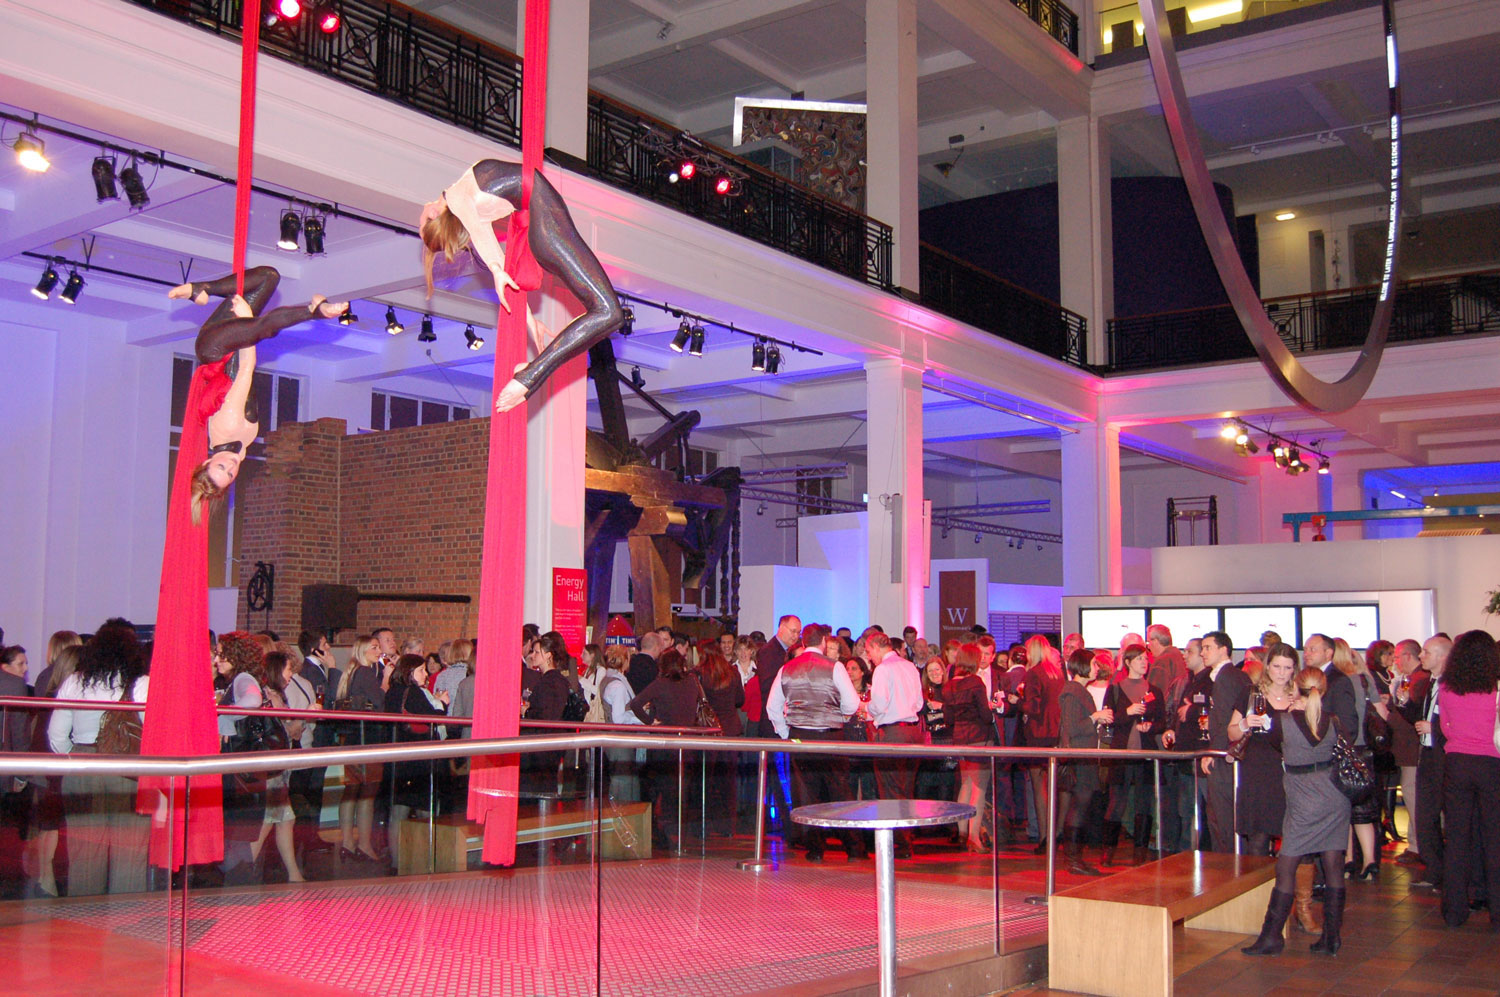 Aerial acrobats performing in the energy hall